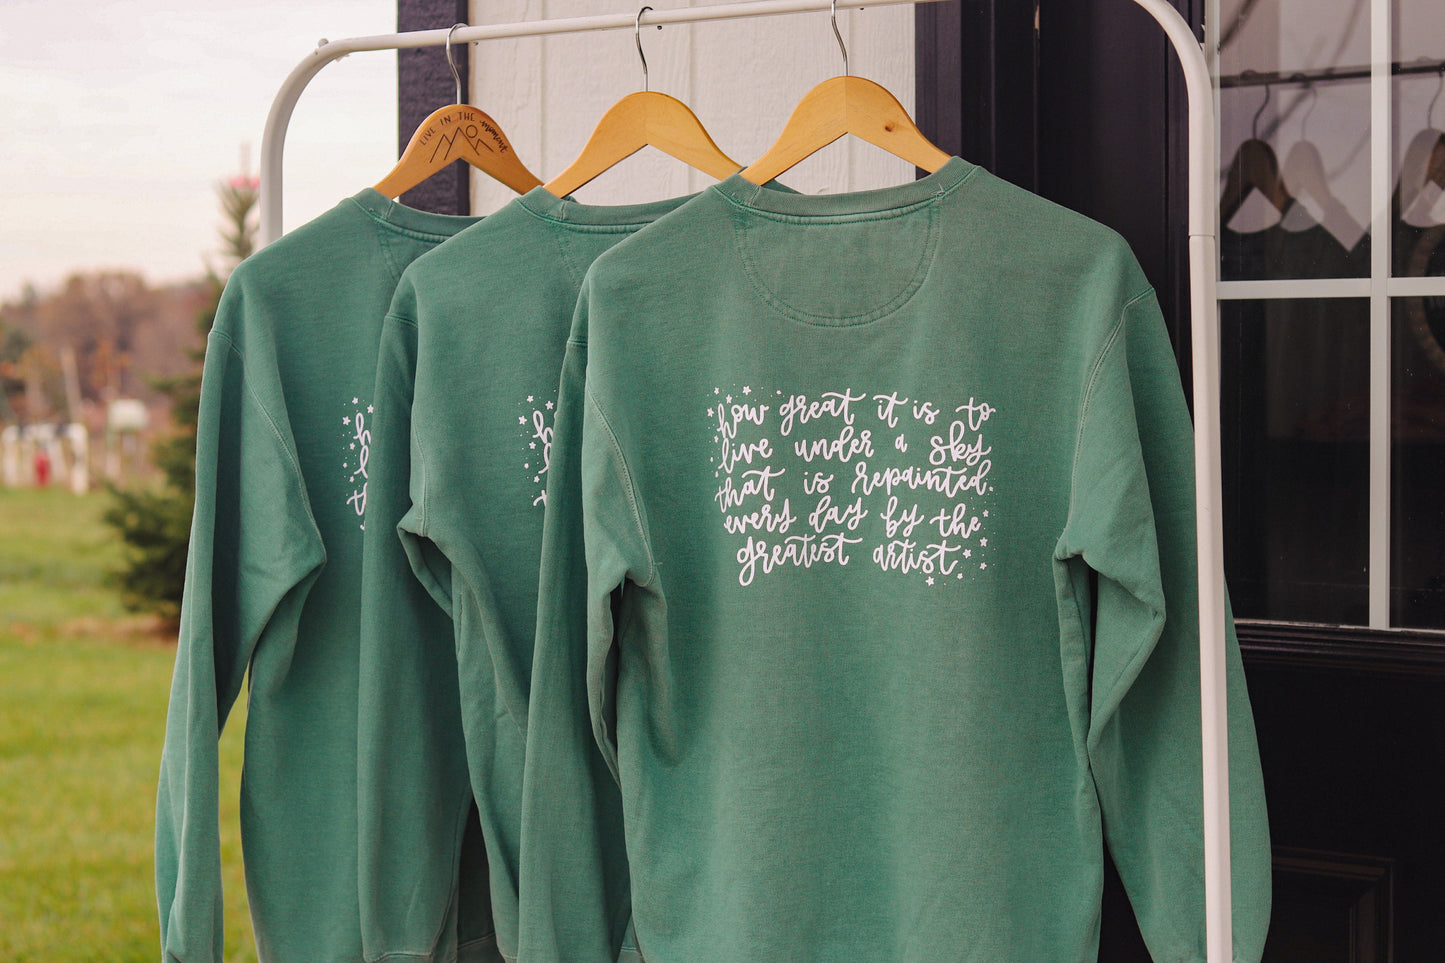 'How great  it is to live under a sky..' handlettered crewneck